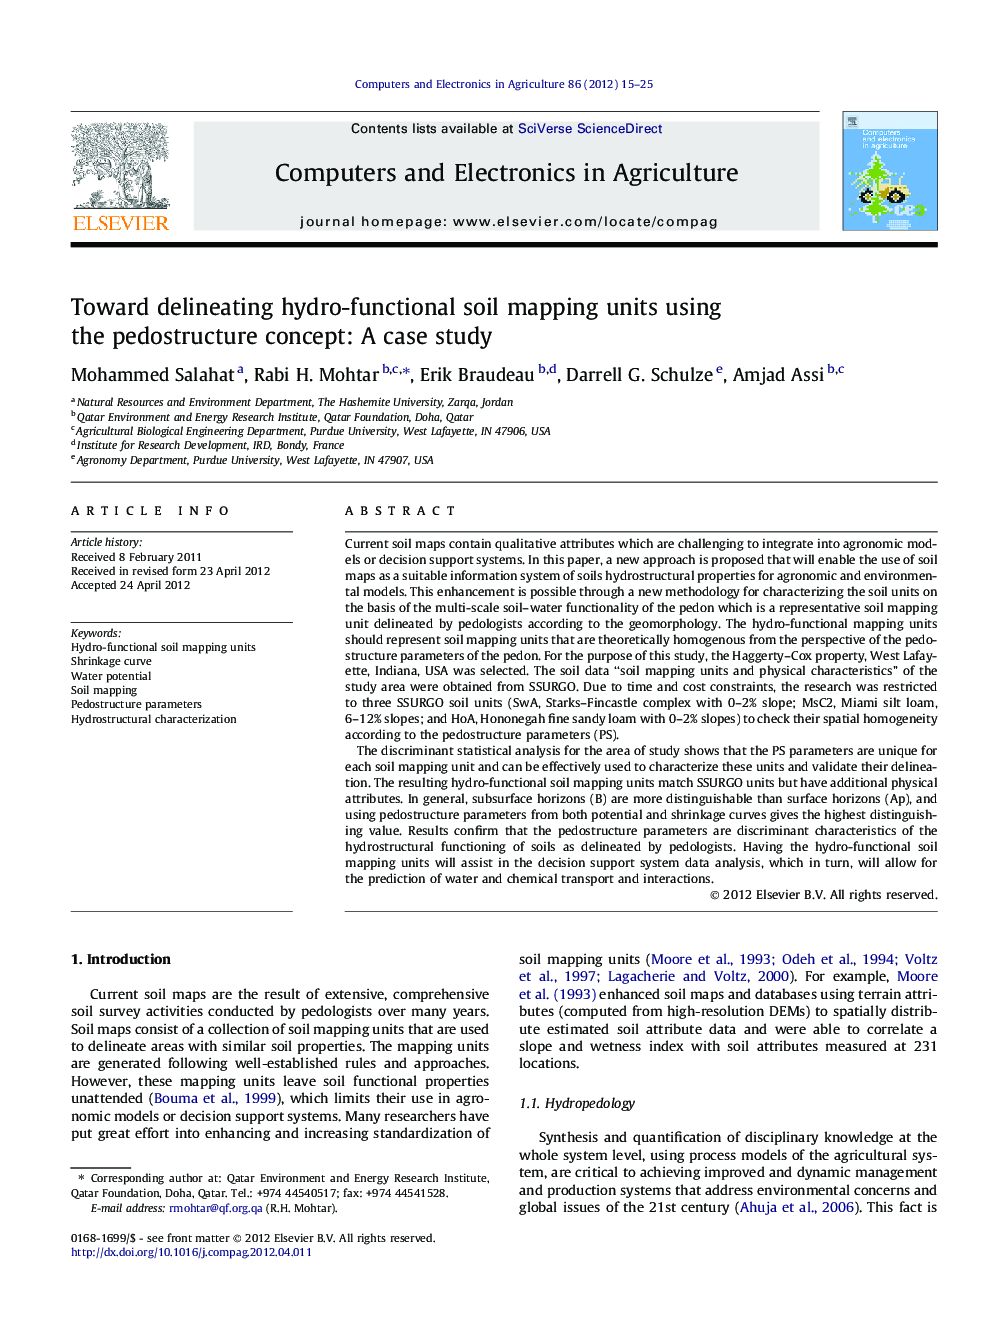 Toward delineating hydro-functional soil mapping units using the pedostructure concept: A case study